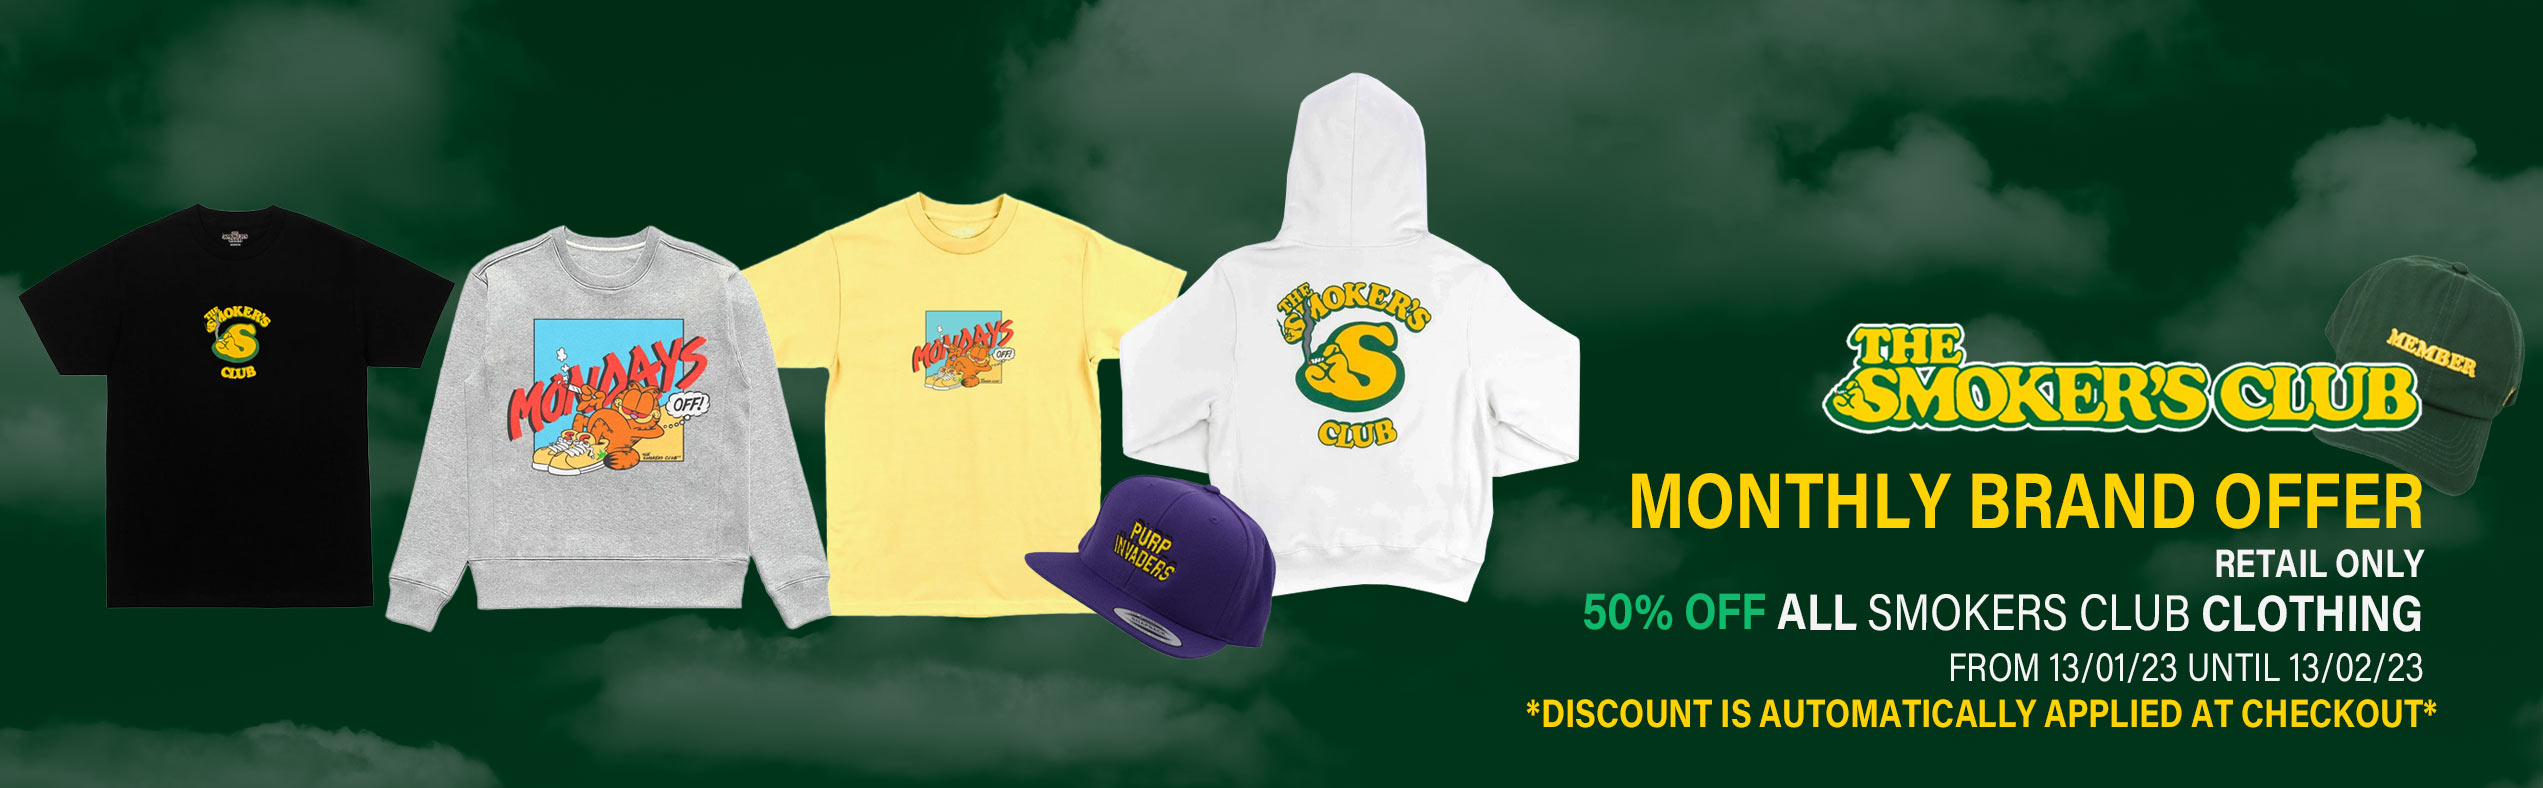 The Smokers Club Clothing